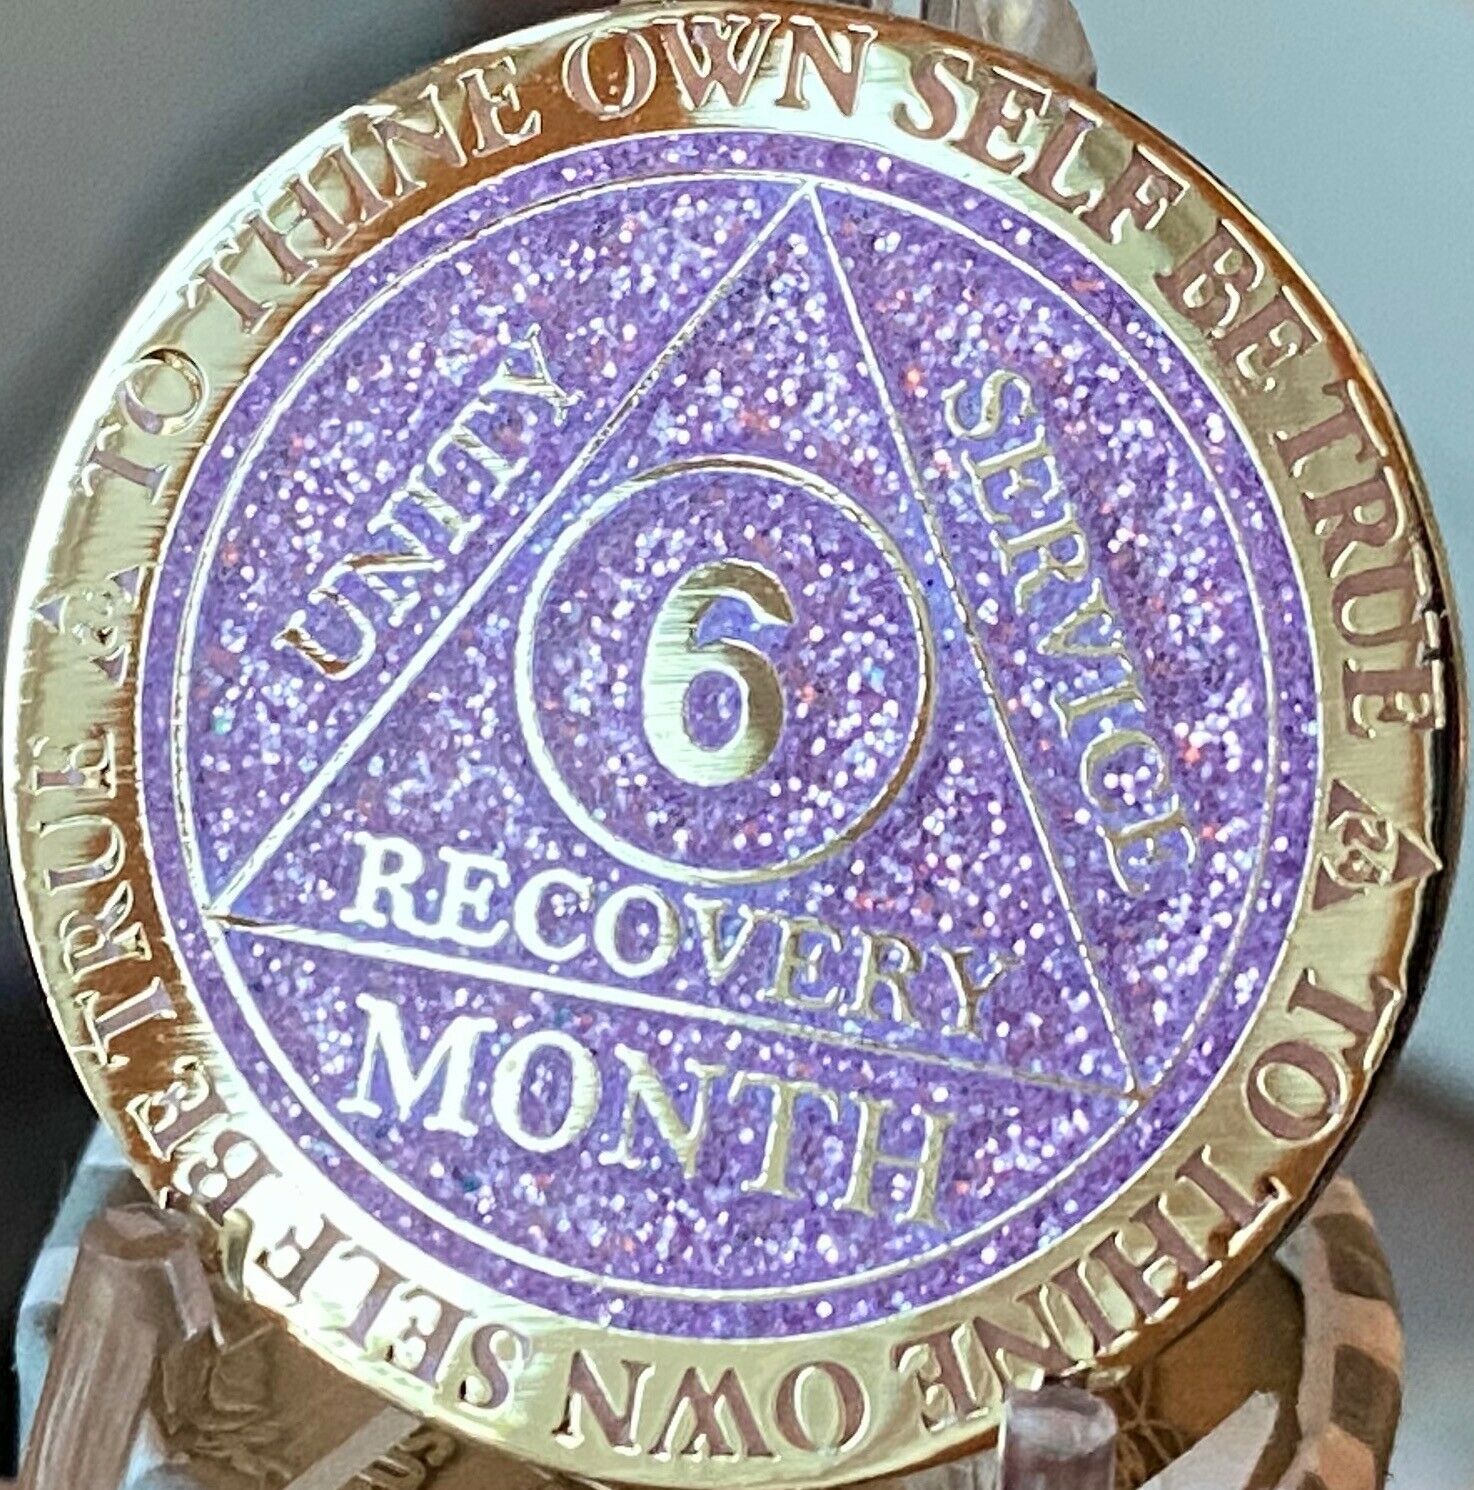 6 Month AA Medallion Recoverychip Reflex Purple Glitter Sobriety Chip Coin